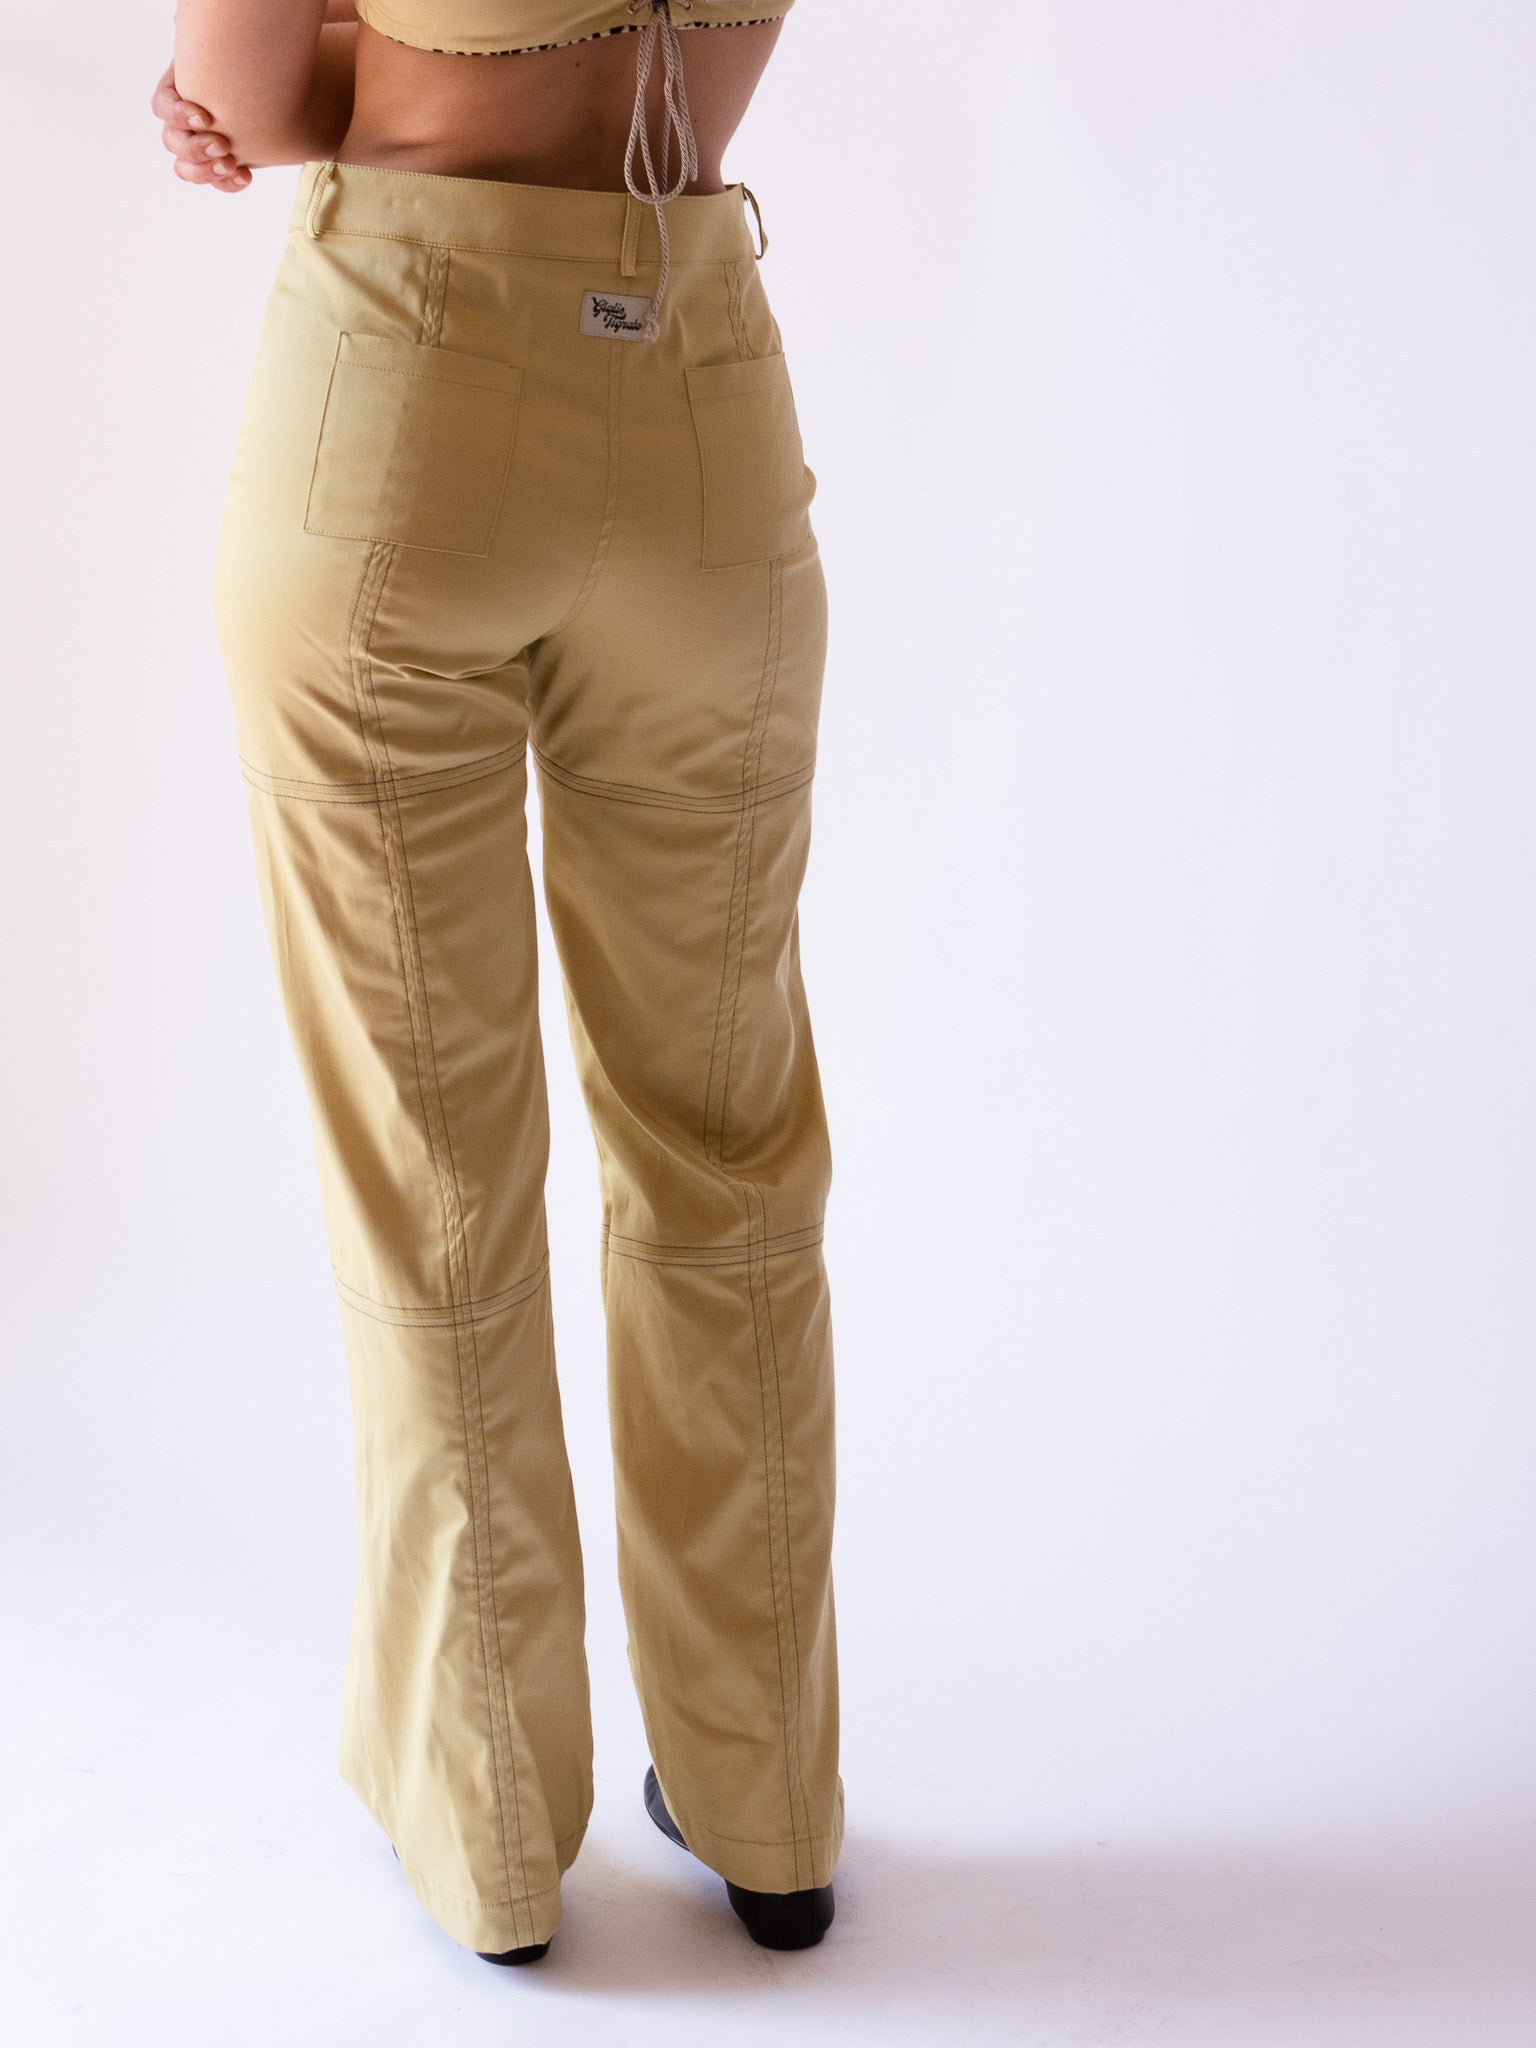 Bamboo Trousers, back view, straight pants, unique, regular fit